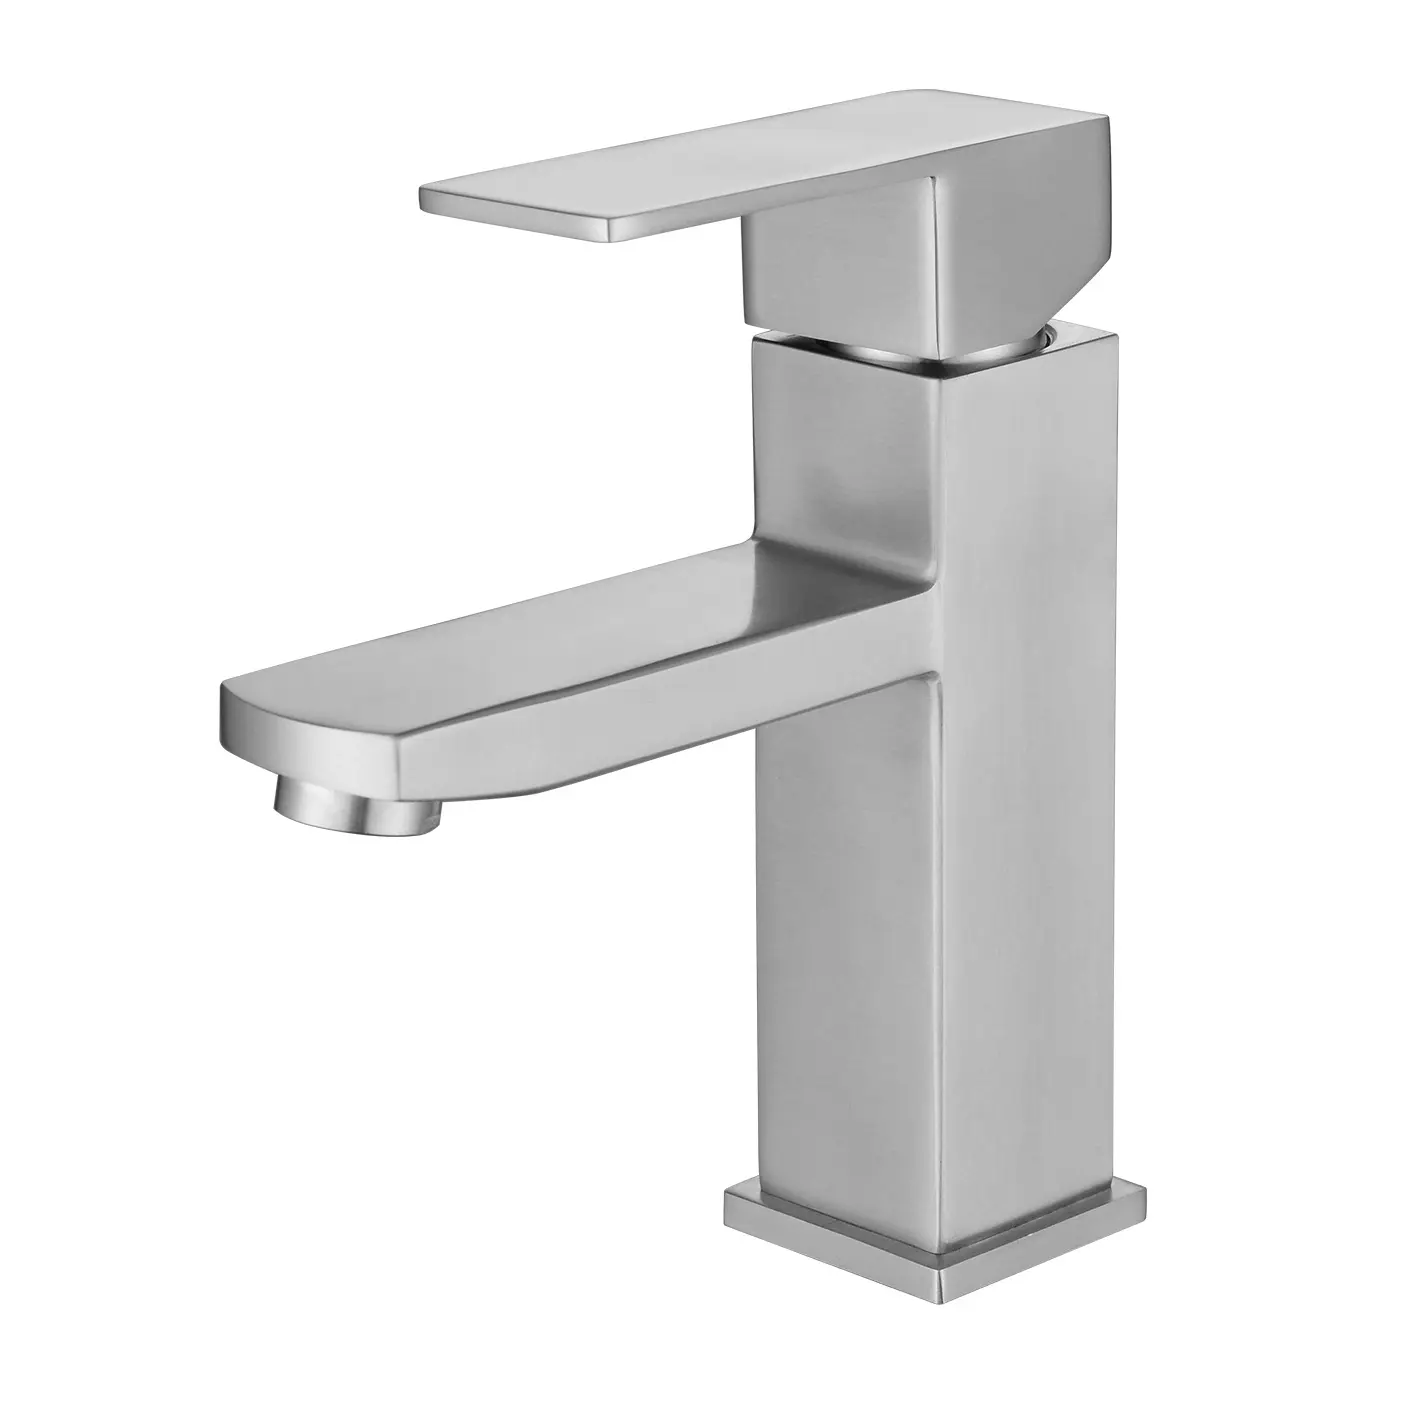 Modern Lavatory Single Handle bathroom faucet stainless Steel Vanity Basin Sink Tap Hot and cold mixer faucets